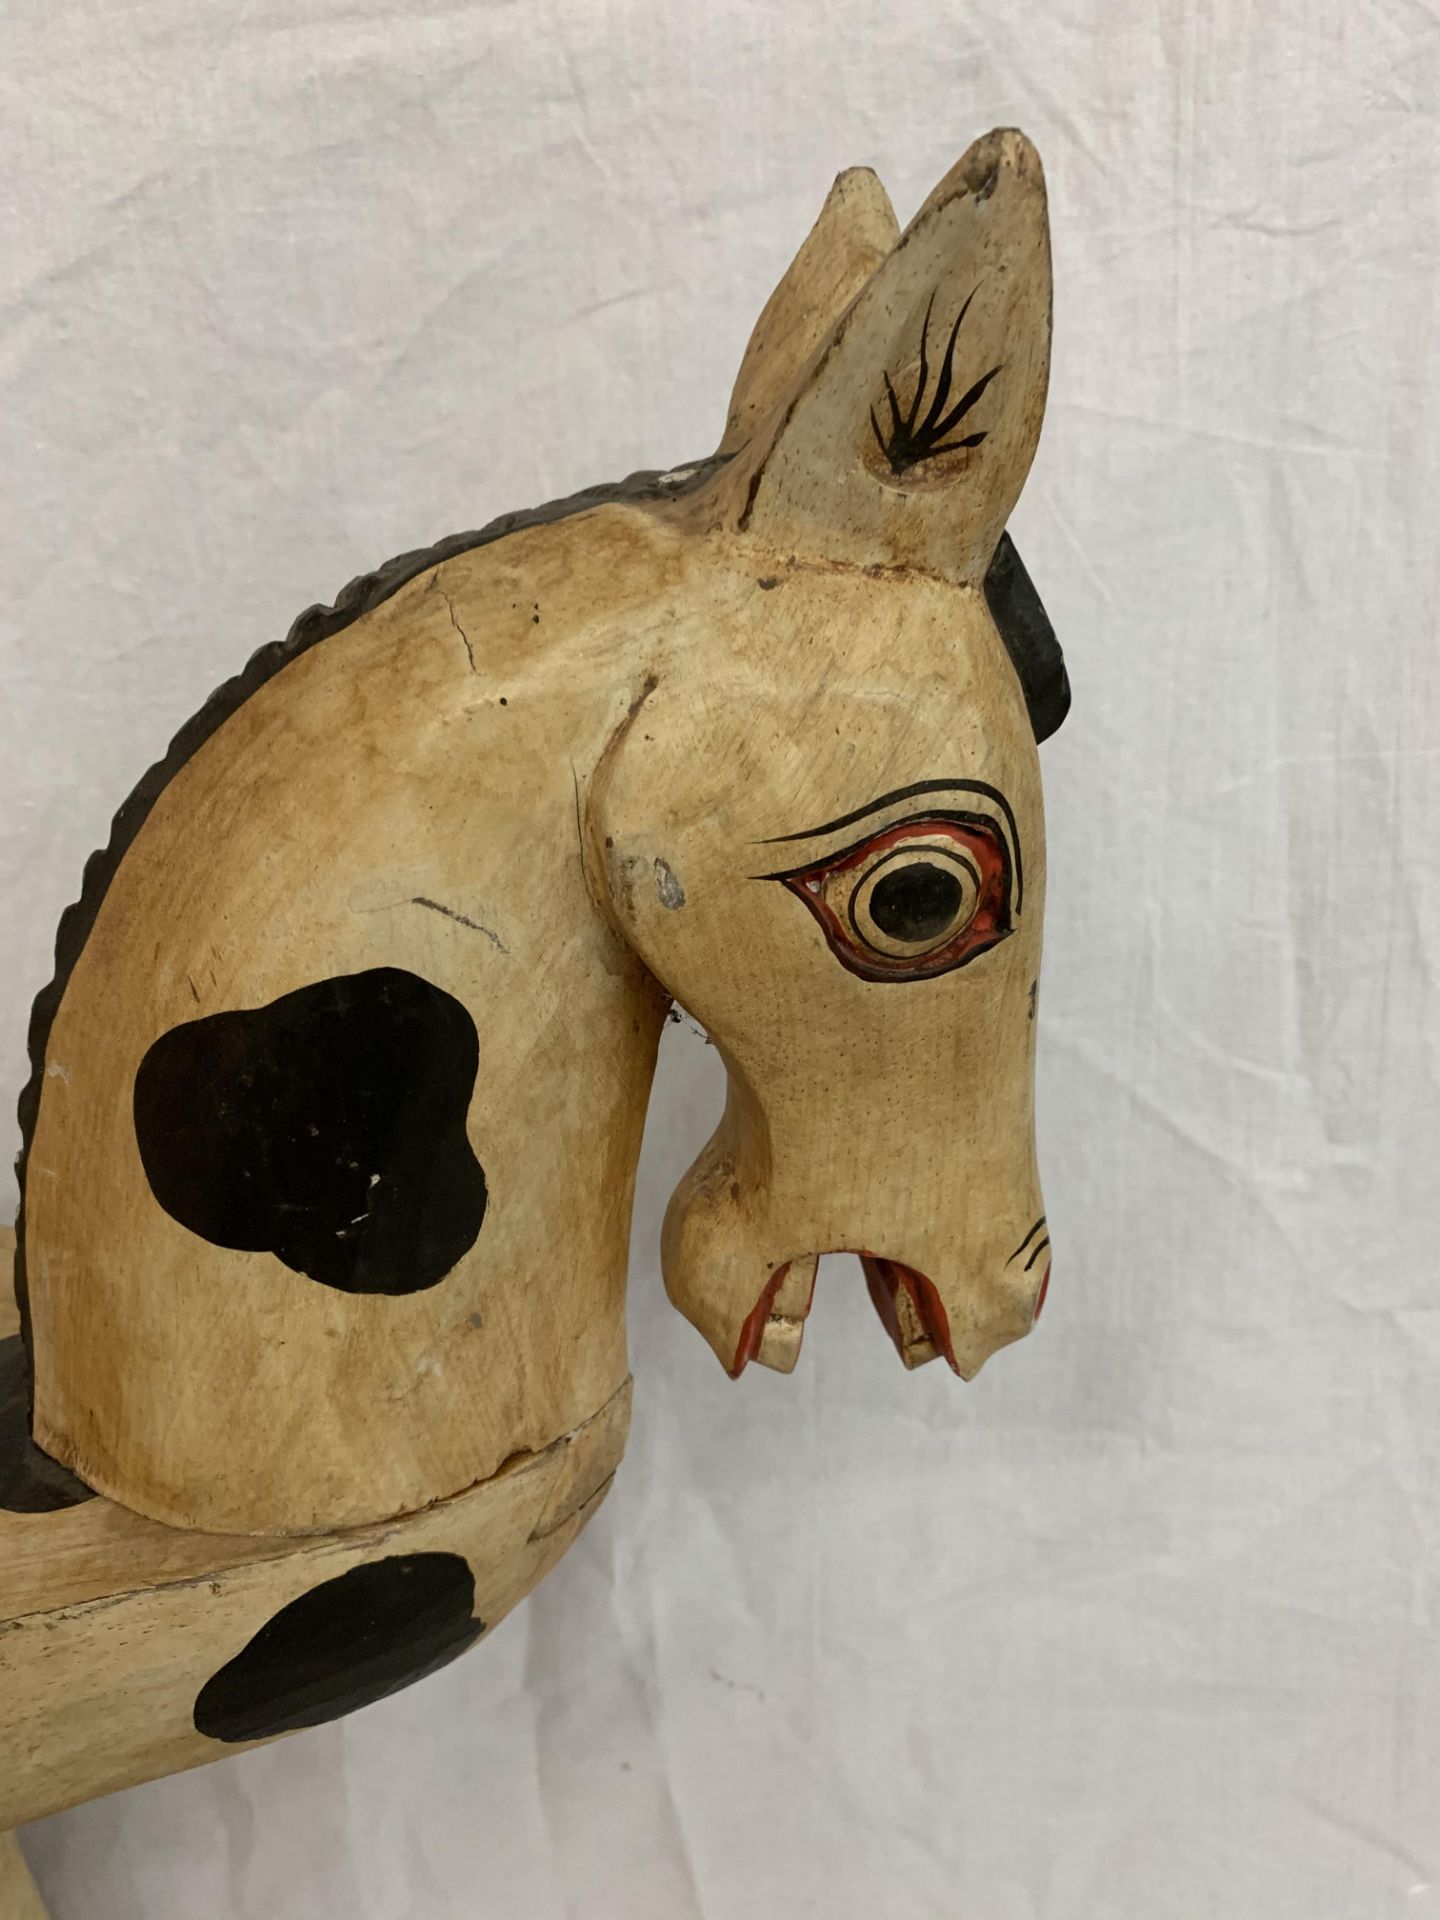 A WOODEN STOOL IN THE FORM OF A HORSE PAINTED IN THE STYLE OF AN APPALOOSA - Image 3 of 6